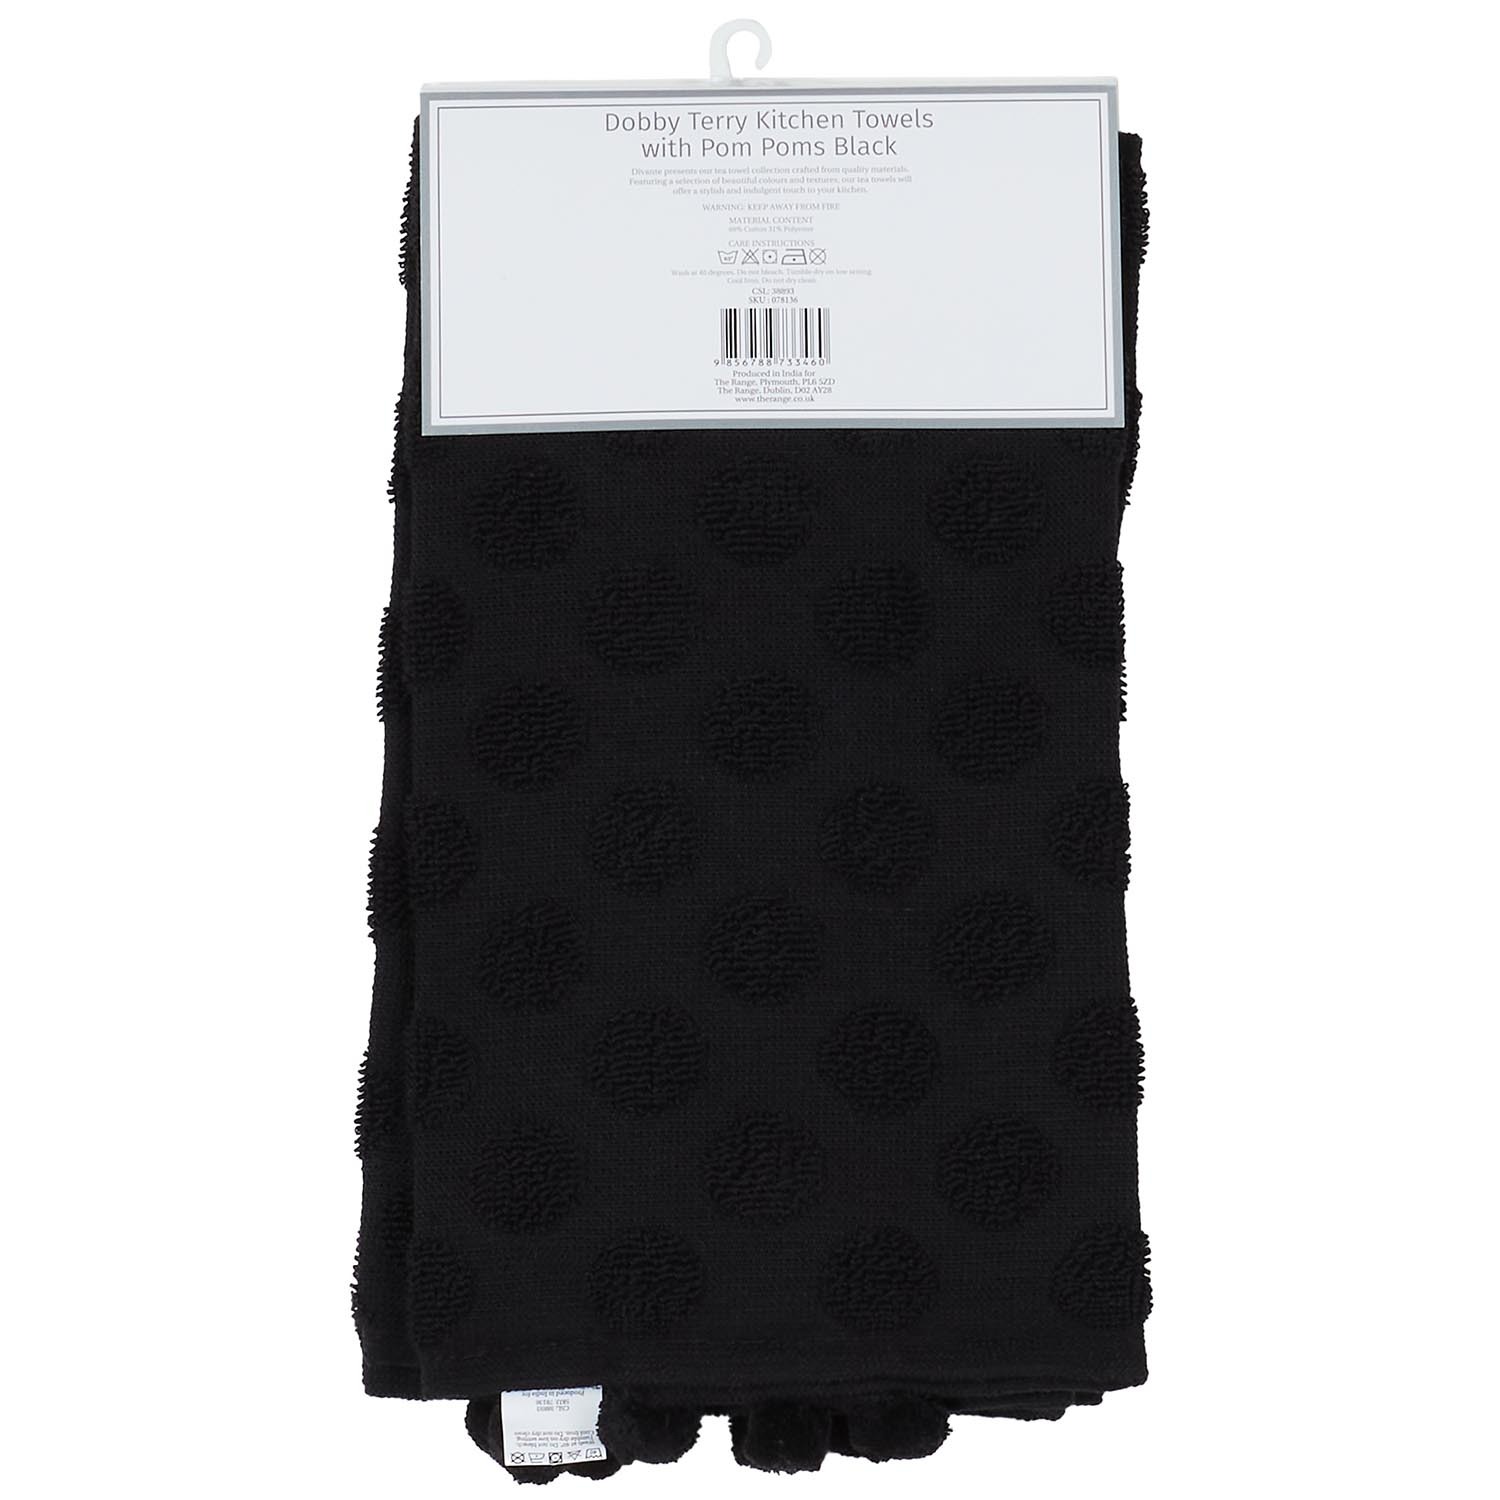 Pack of 2 Dobby Terry Kitchen Towels with Pom Poms - Black Image 5